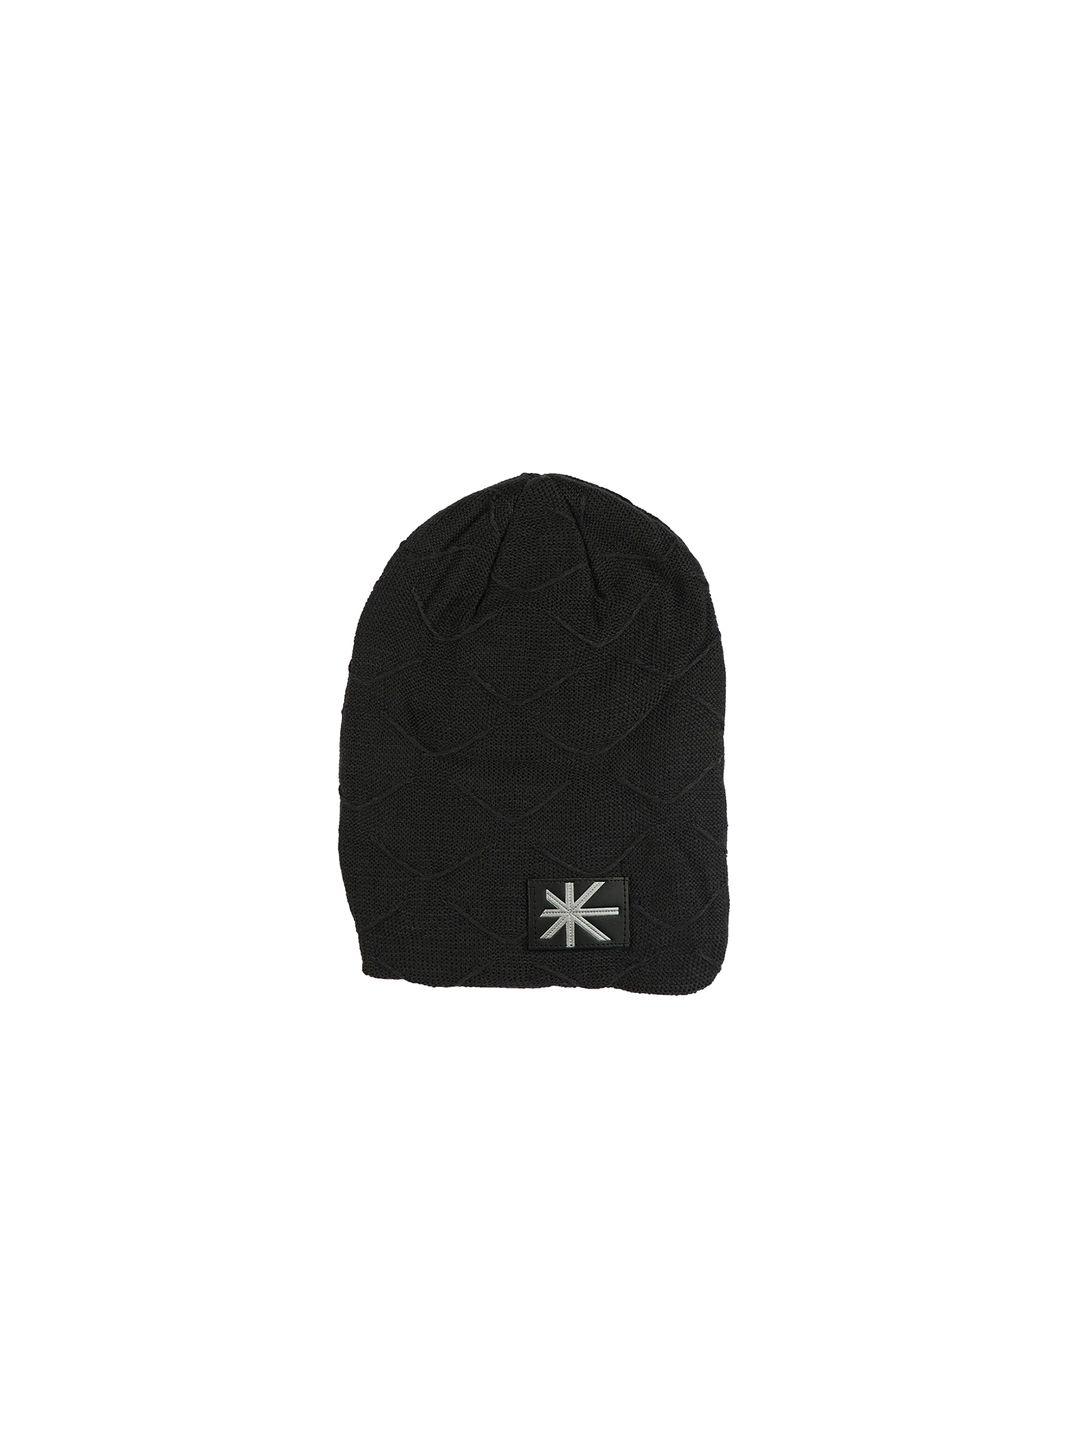 isweven unisex grey solid beanie